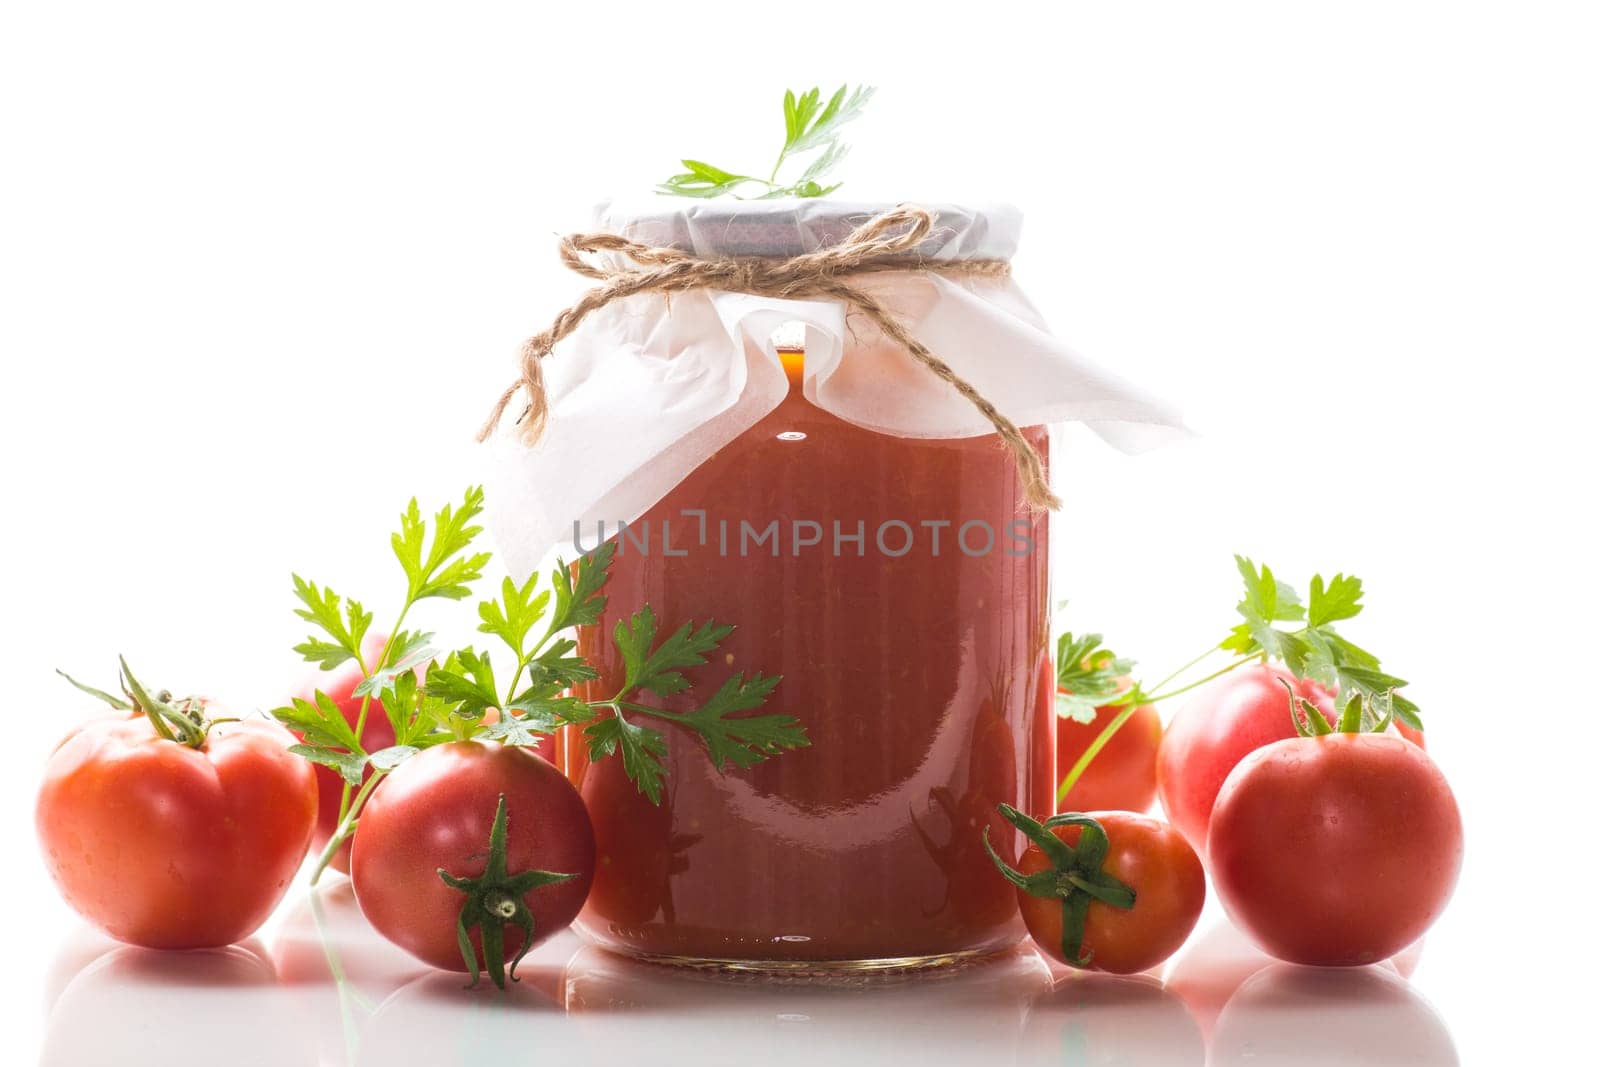 Cooked homemade tomato juice canned in a jar of natural tomatoes, isolated on white background.